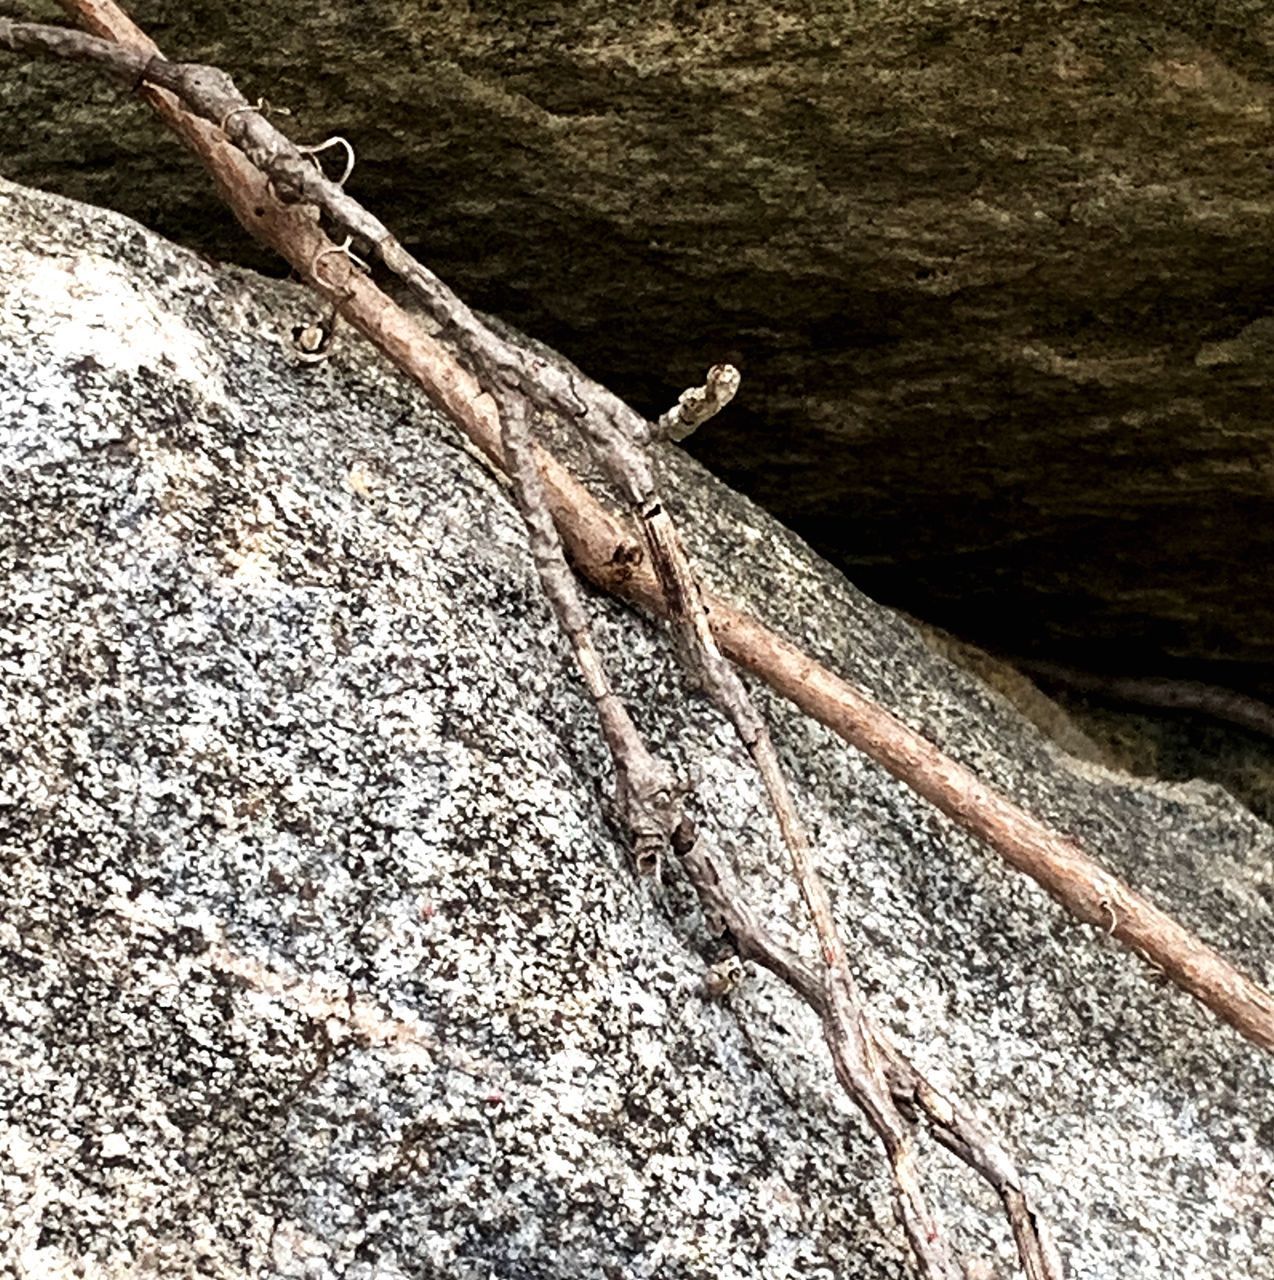 CLOSE-UP OF LIZARD ON ROCK AGAINST TREES